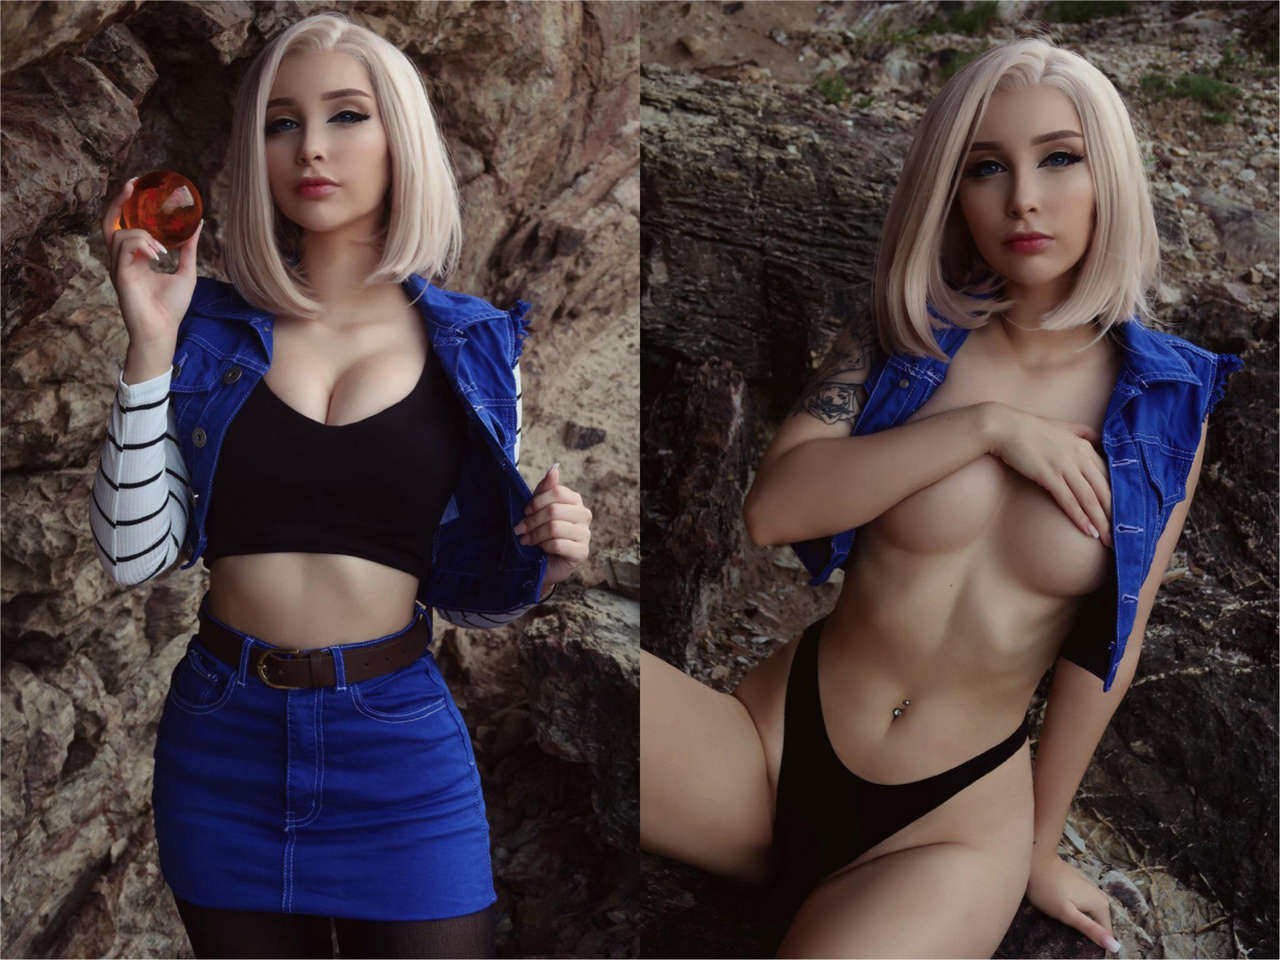 Android 18 By Beke Jacob